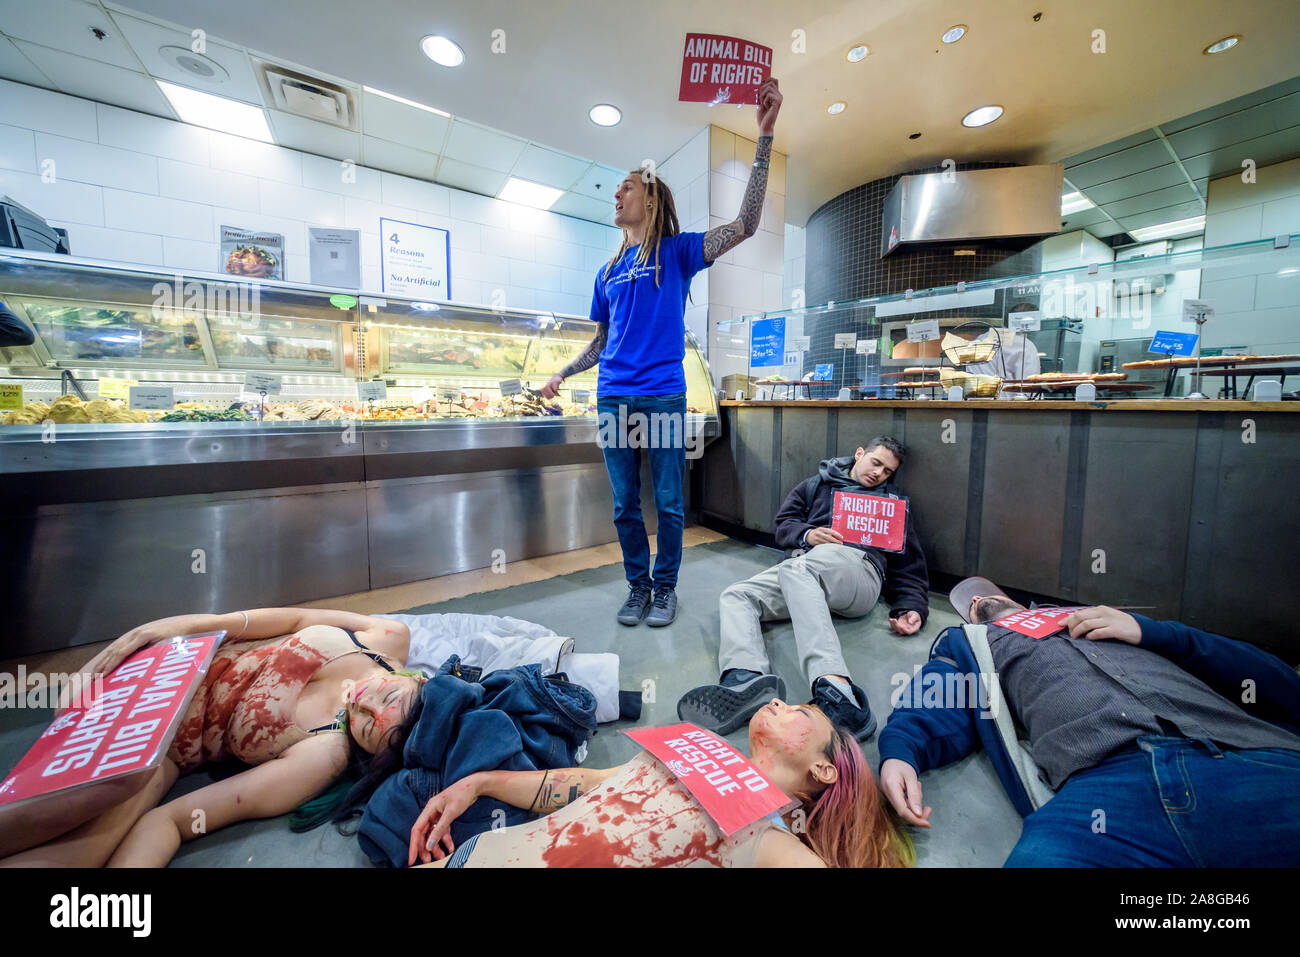 New York, USA. 8th Nov, 2019. Animal liberation activists with the  grassroots animal rights network Direct Action Everywhere (DxE) disrupted  business as usual inside Whole Foods, a business owned by Amazon, staging